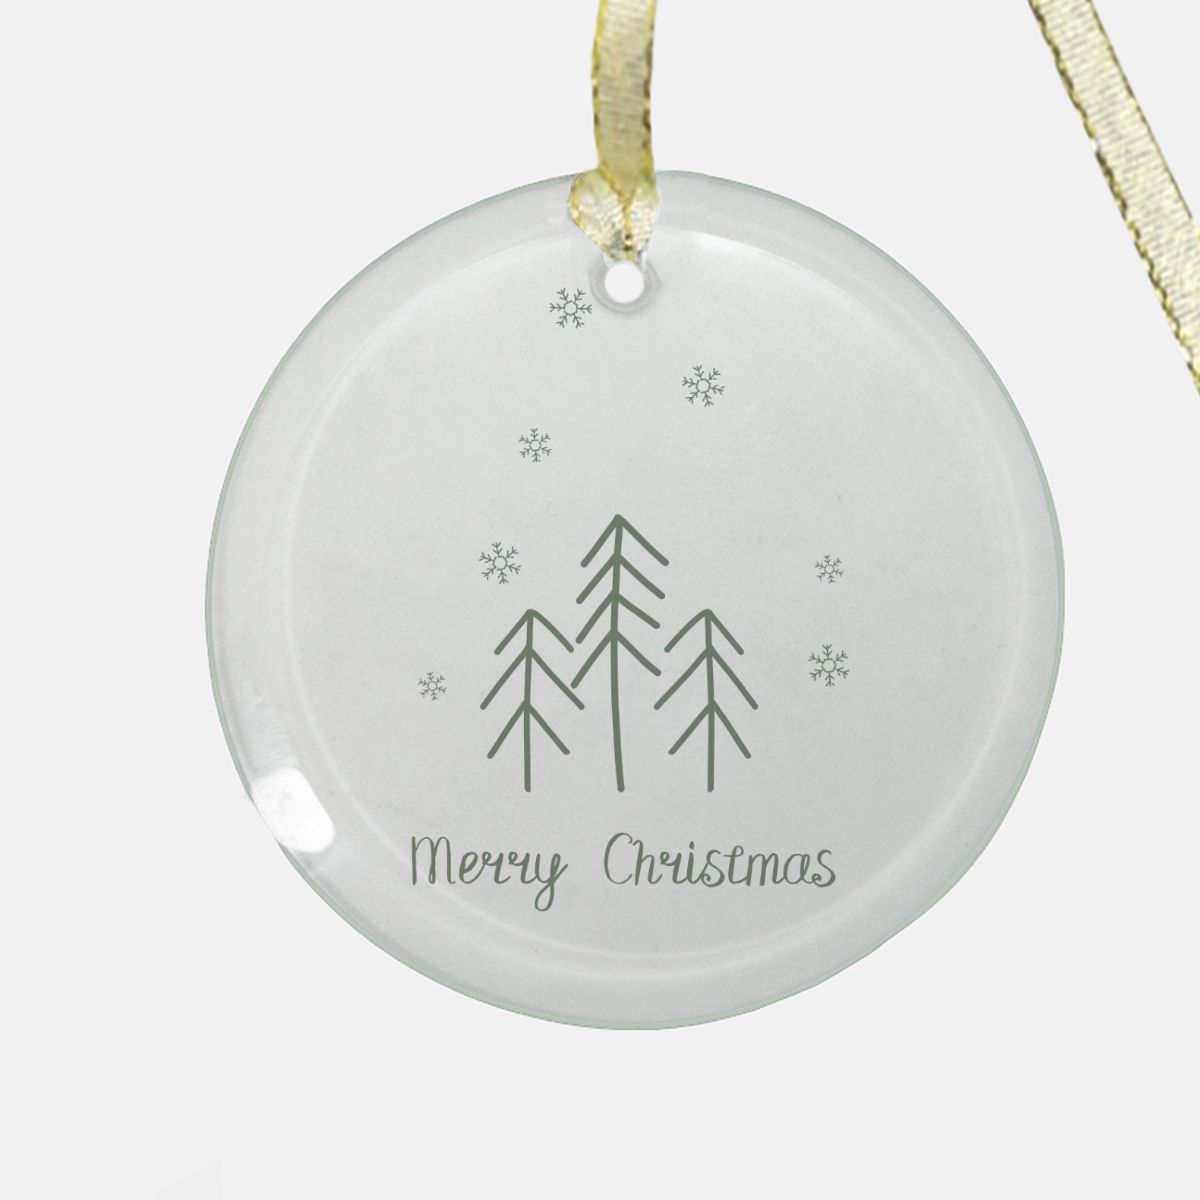 Round Clear Glass Holiday Ornament - Merry Christmas Evergreen Trees